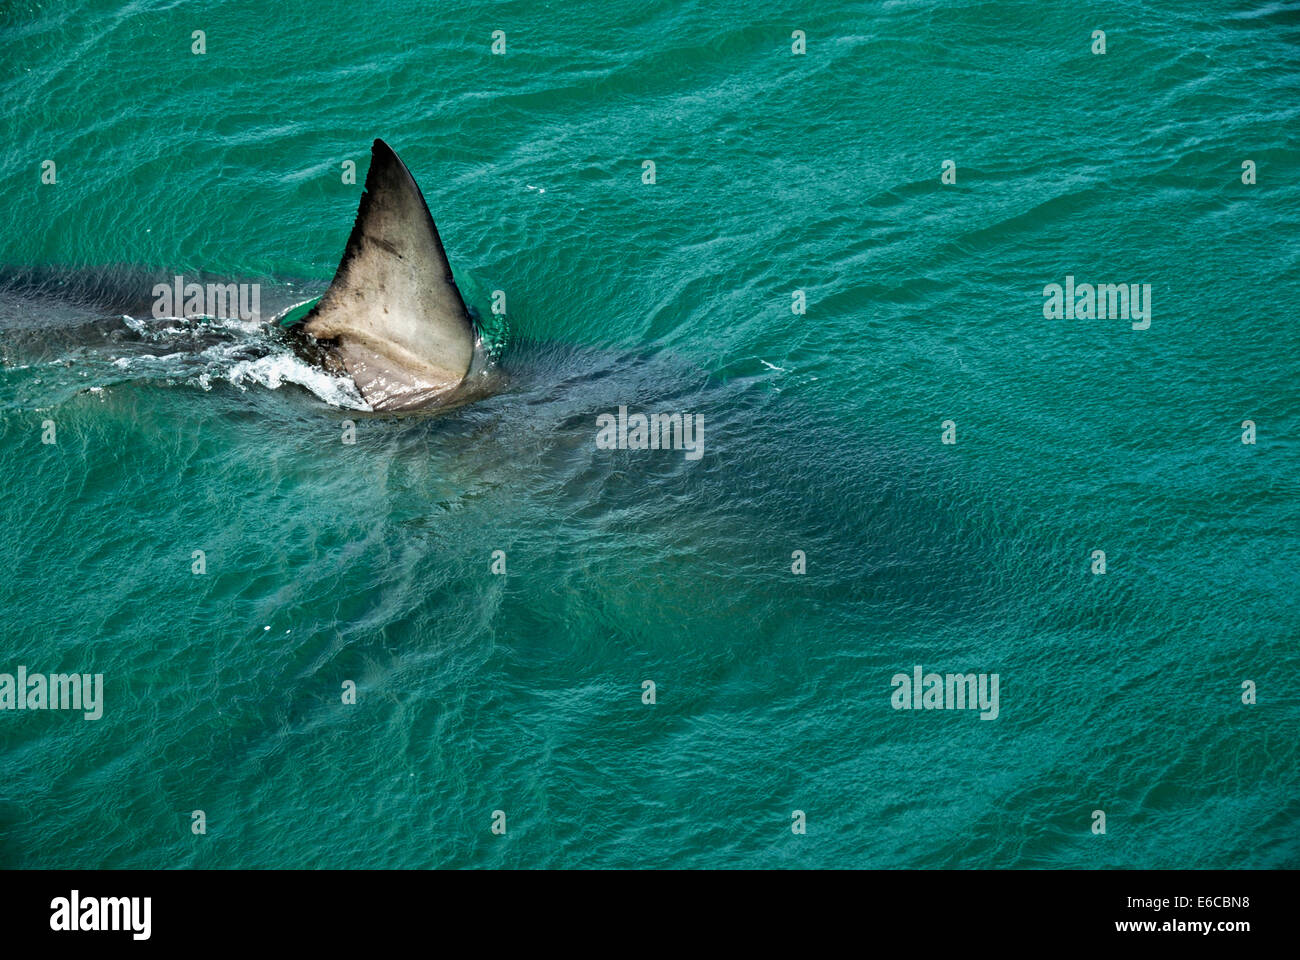 Dorsal fin of a Great White shark (Carcharodon carcharias) swimming near water surface, Gansbaii, South Africa Stock Photo